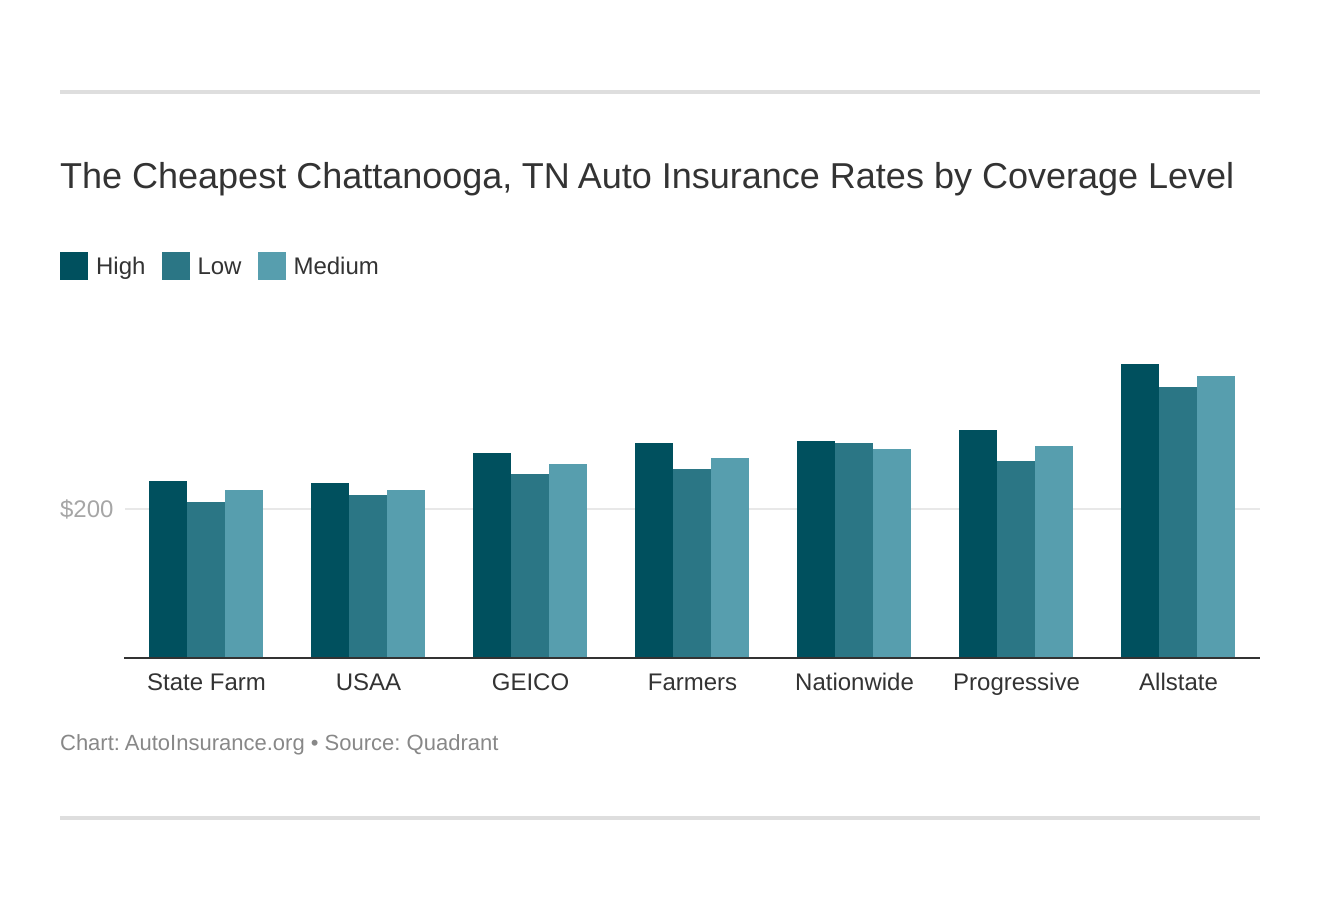 The Cheapest Chattanooga, TN Auto Insurance Rates by Coverage Level